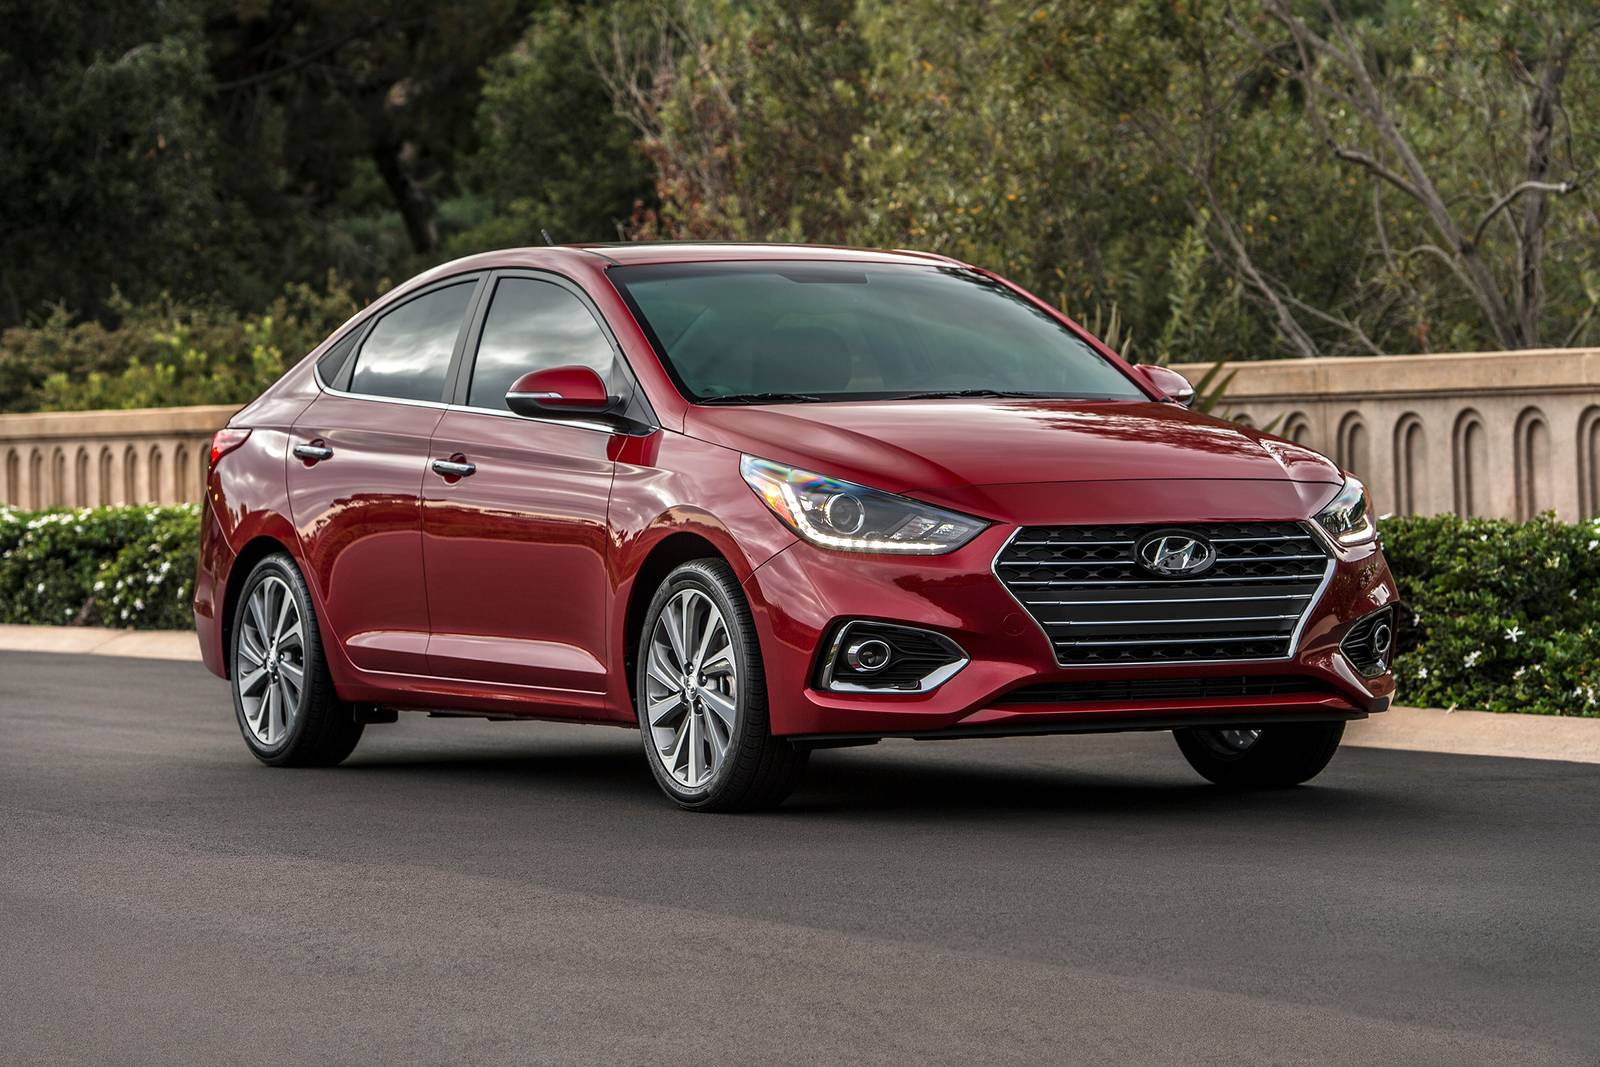 2022 Hyundai Accent Prices, Reviews, and Pictures | Edmunds